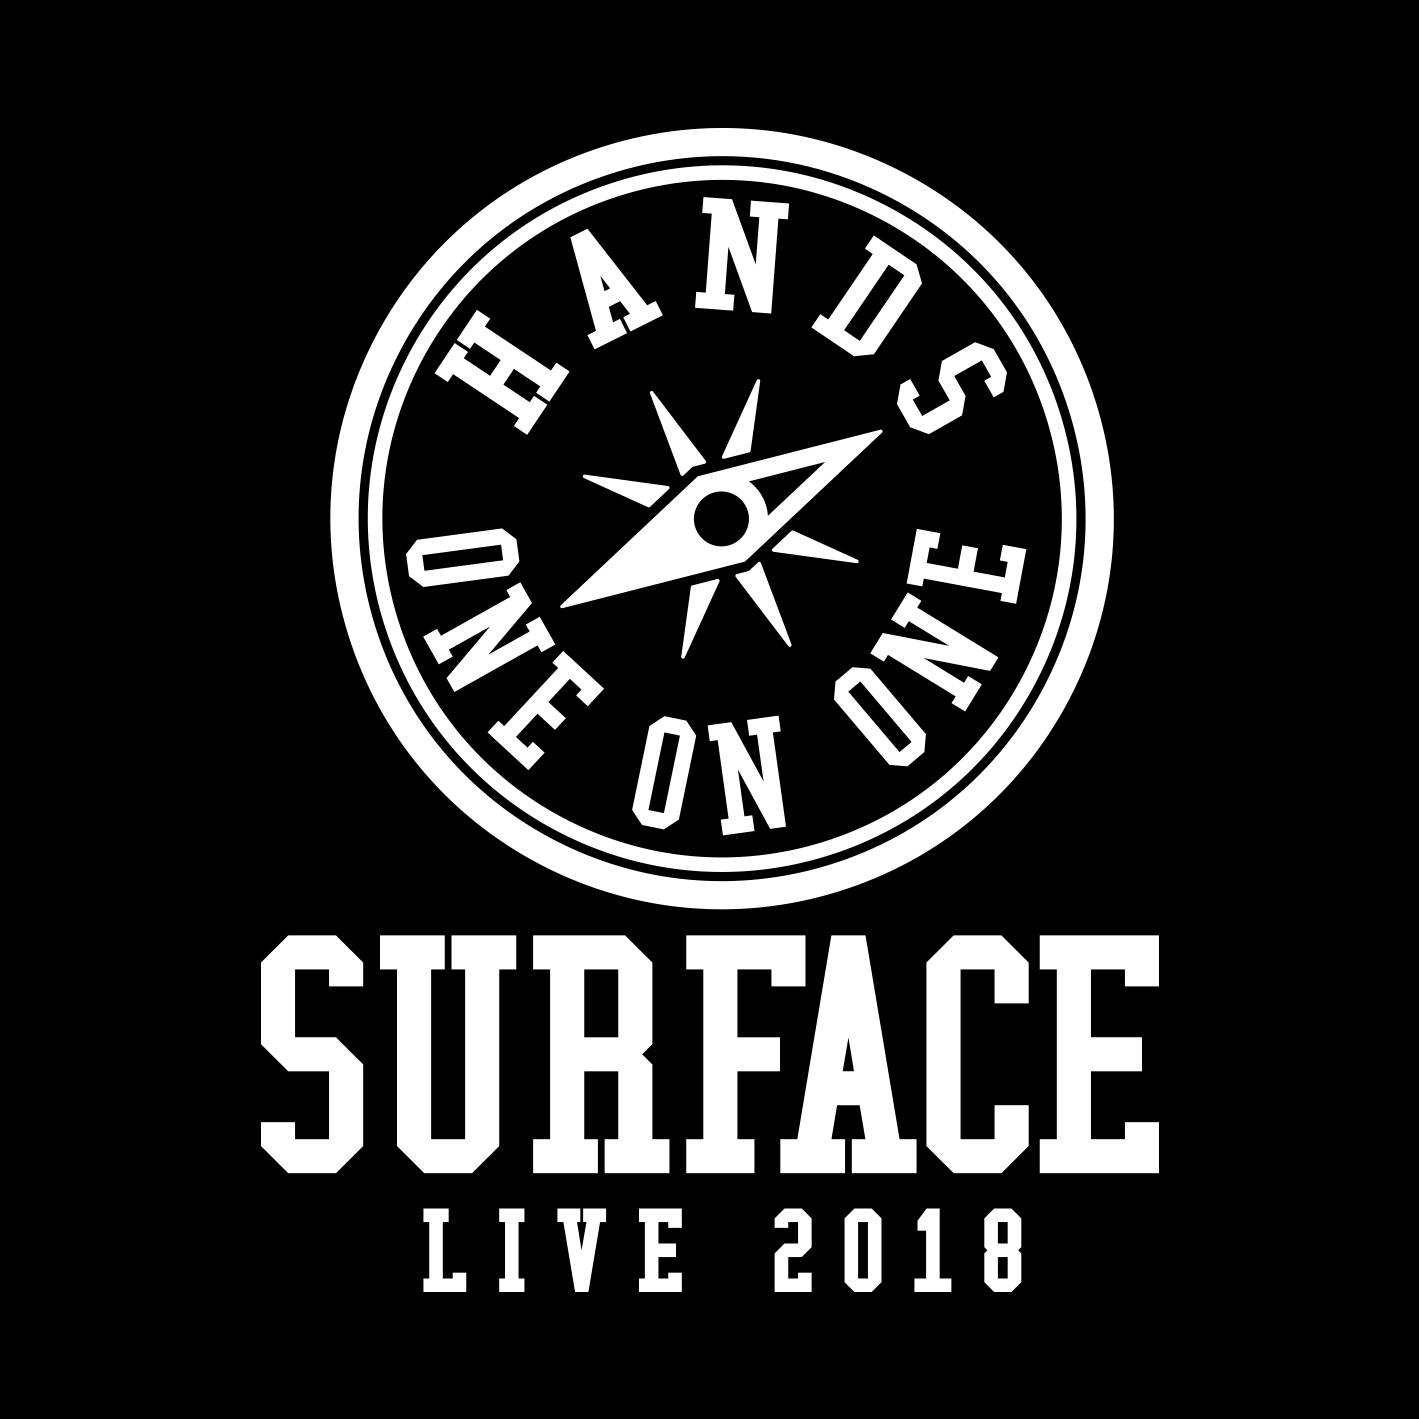 SURFACE LIVE 2018「HANDS～one on one～」LOGO